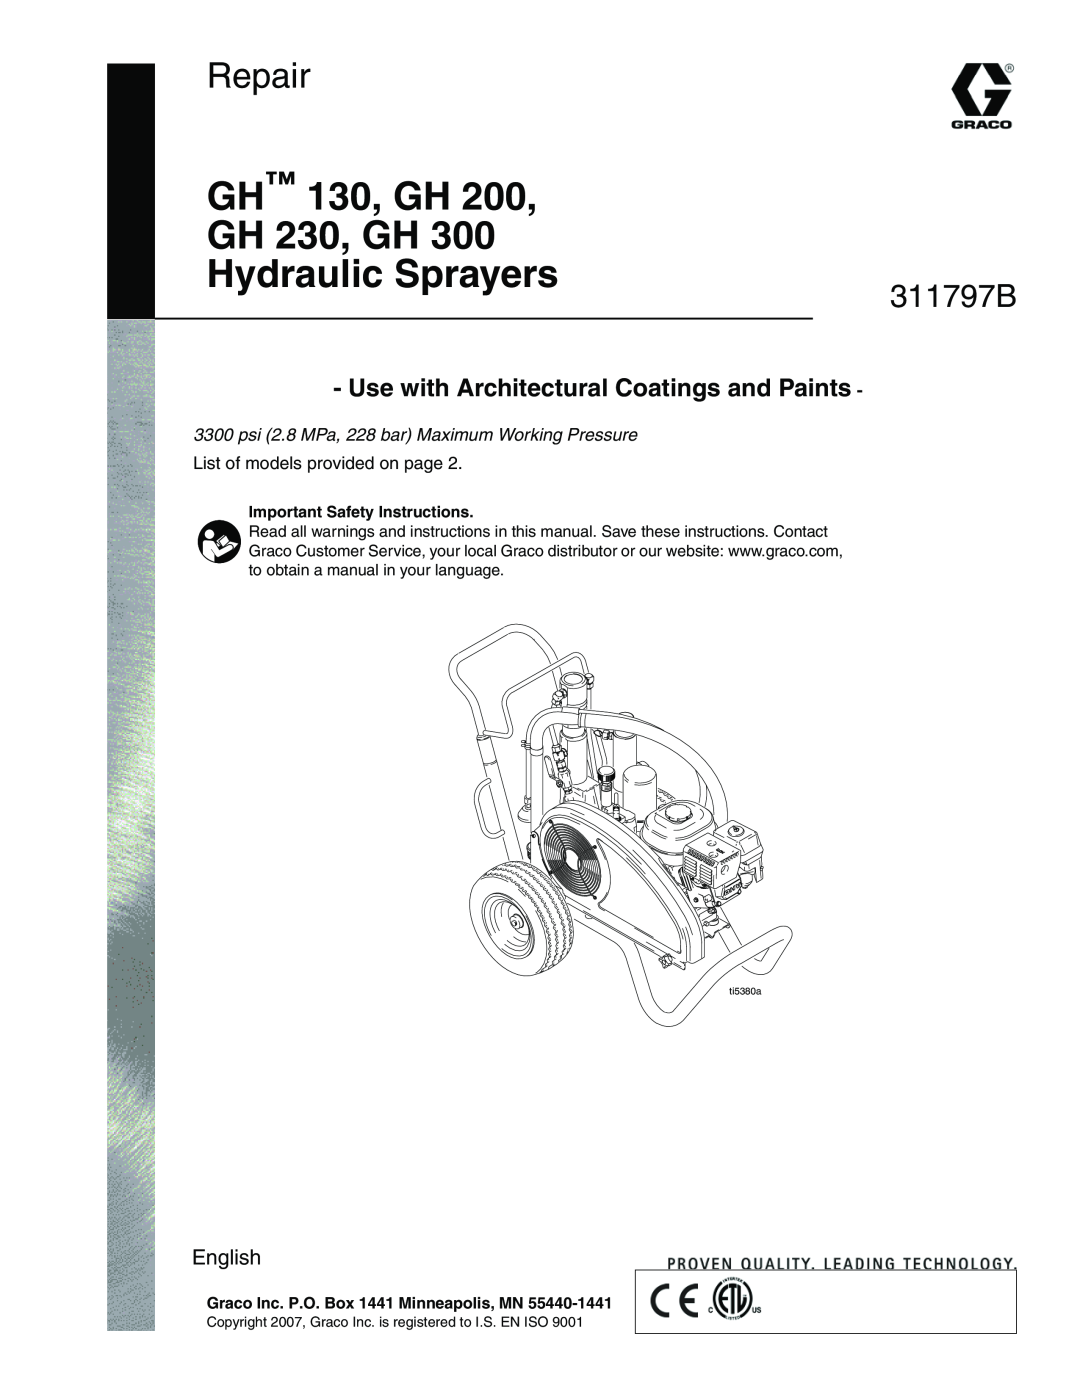 Uniden GH 200 important safety instructions psi 2.8 MPa, 228 bar Maximum Working Pressure, Repair, 311797B, English 